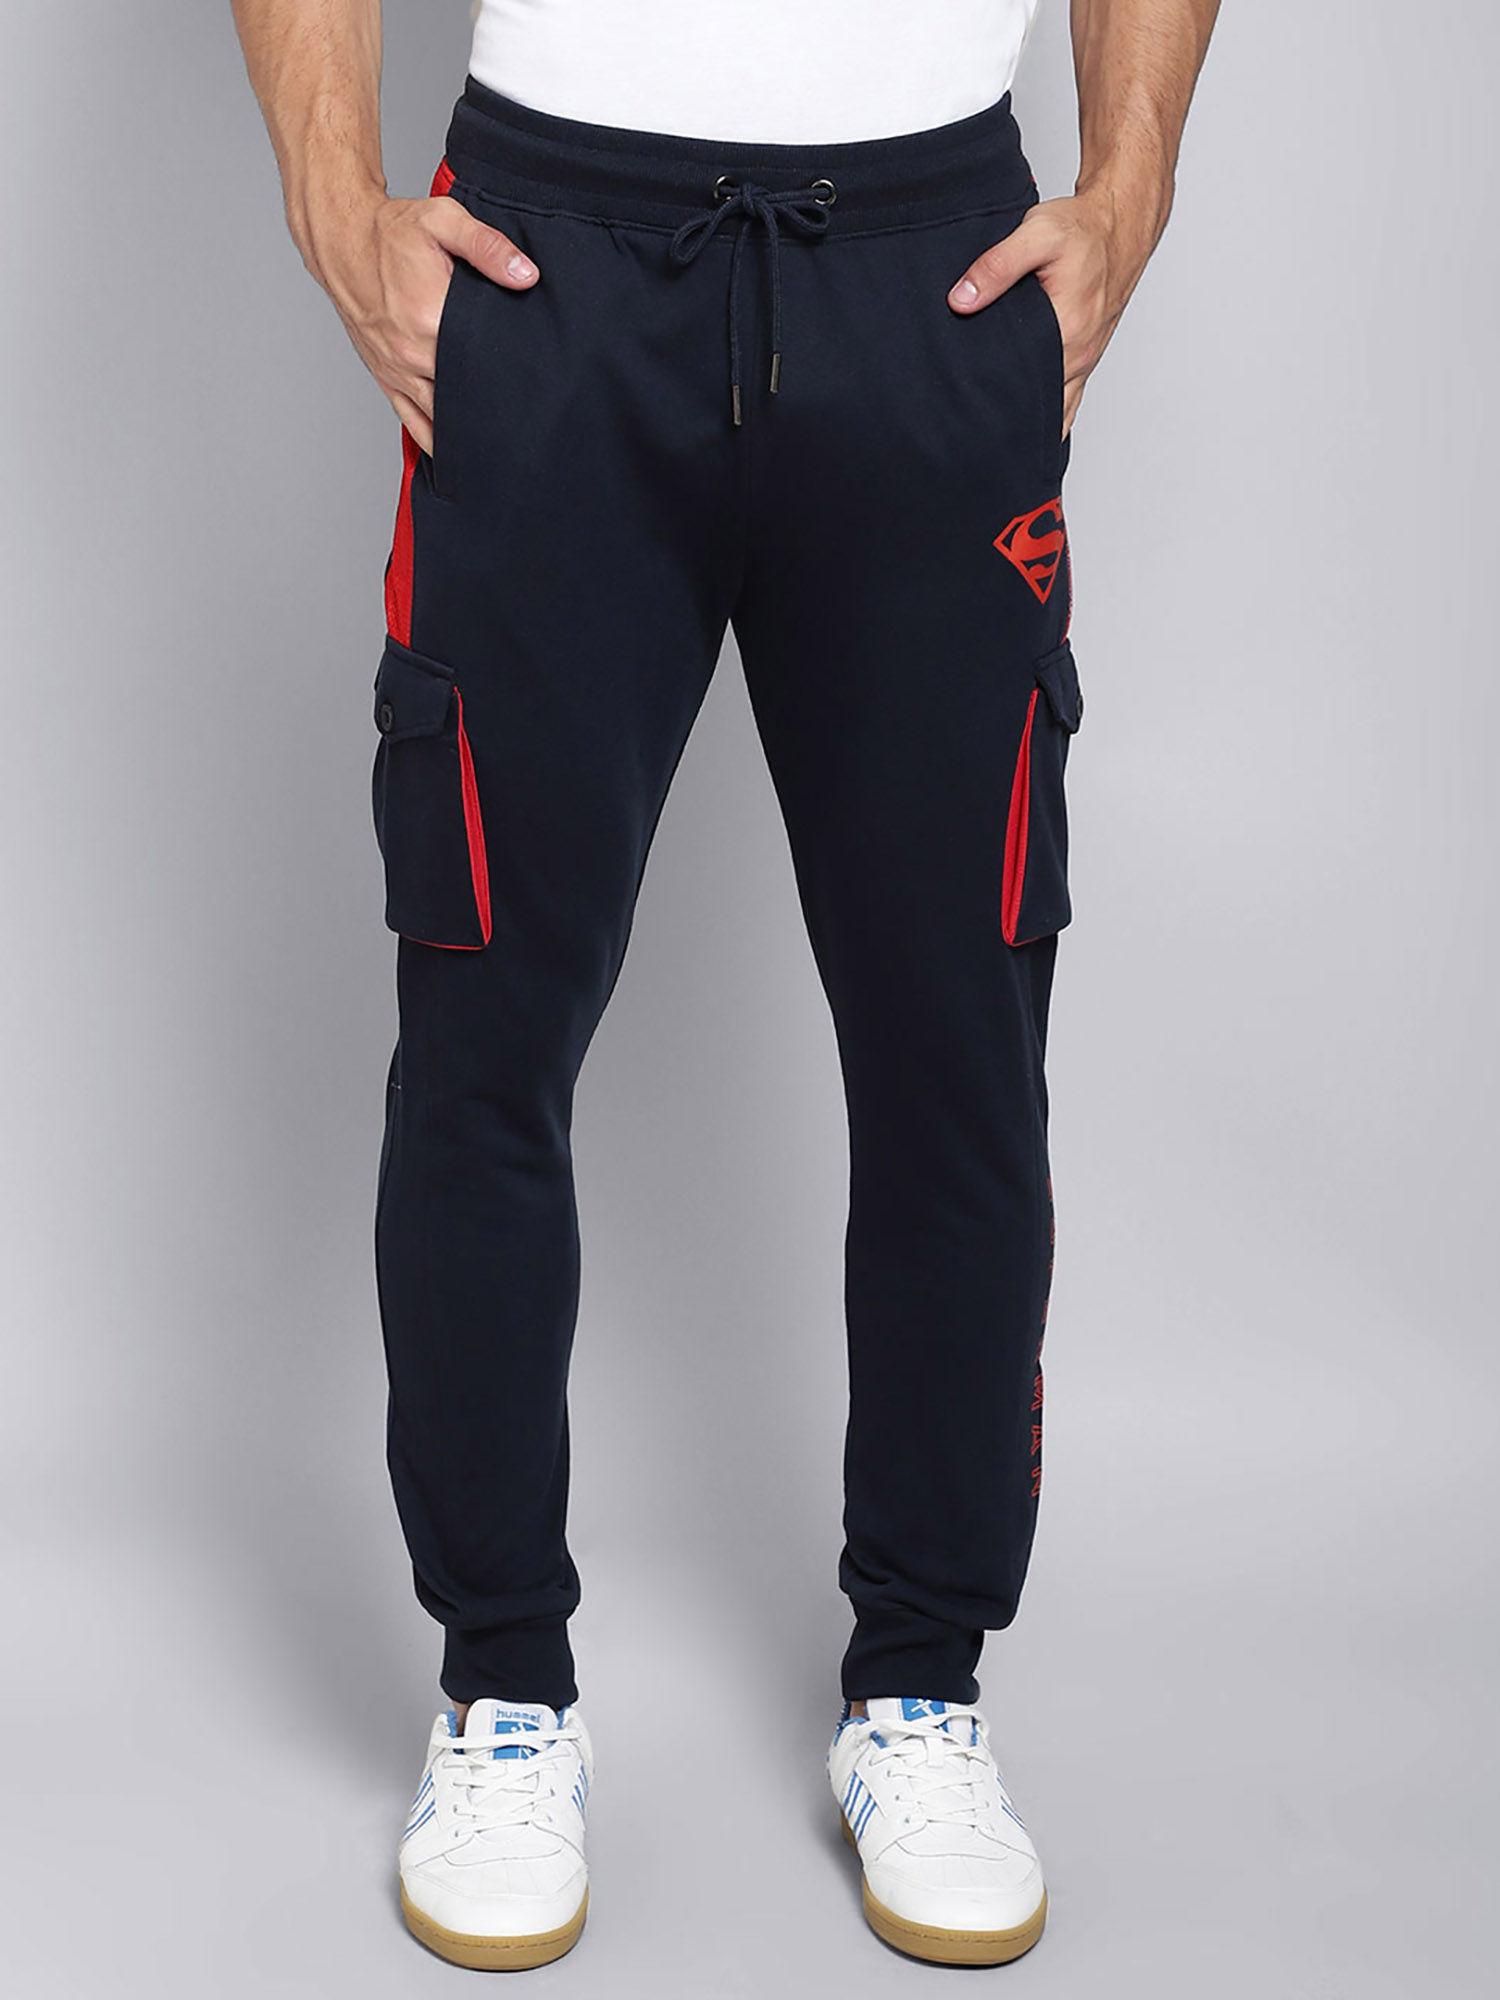 superman featured navy joggers for men